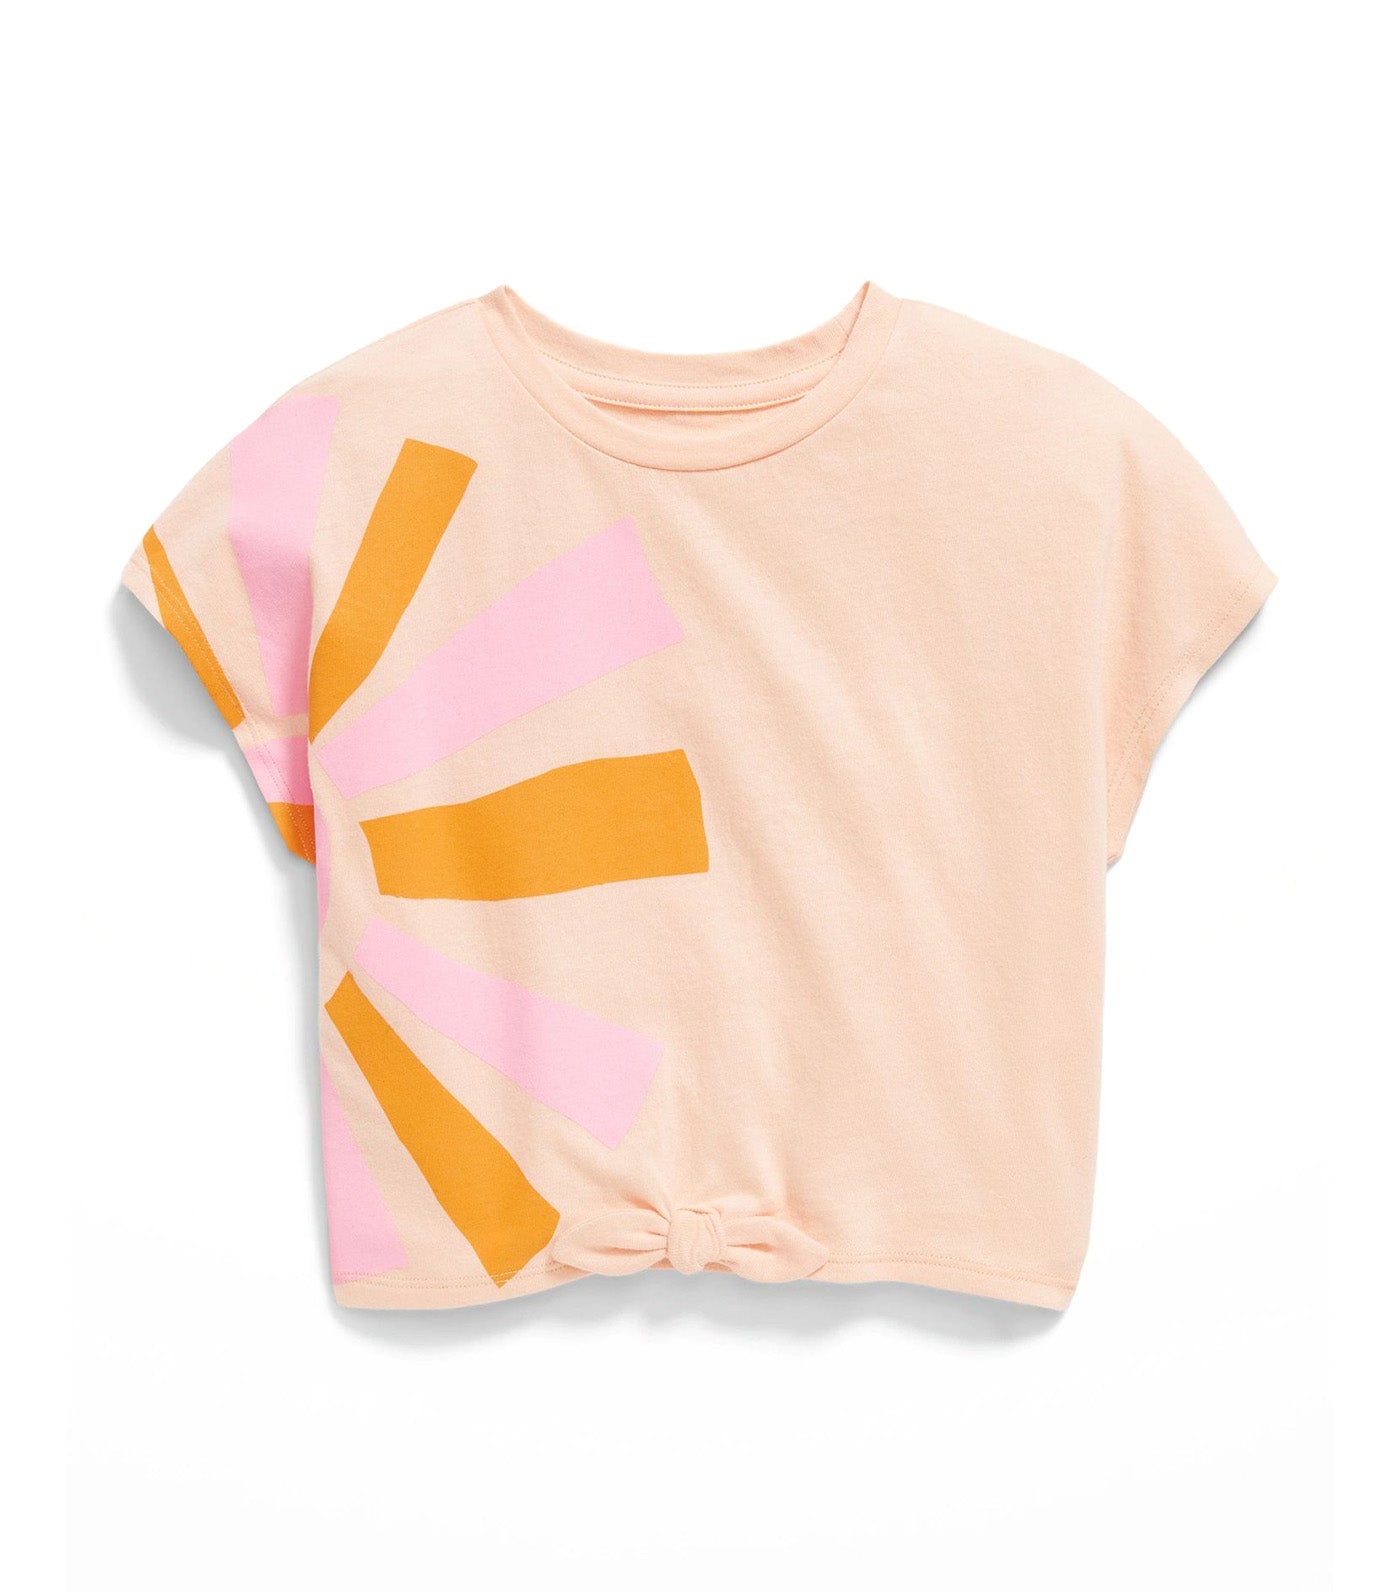 Printed Dolman-Sleeve Tie-Front T-Shirt for Toddler Girls - Apricot Wash